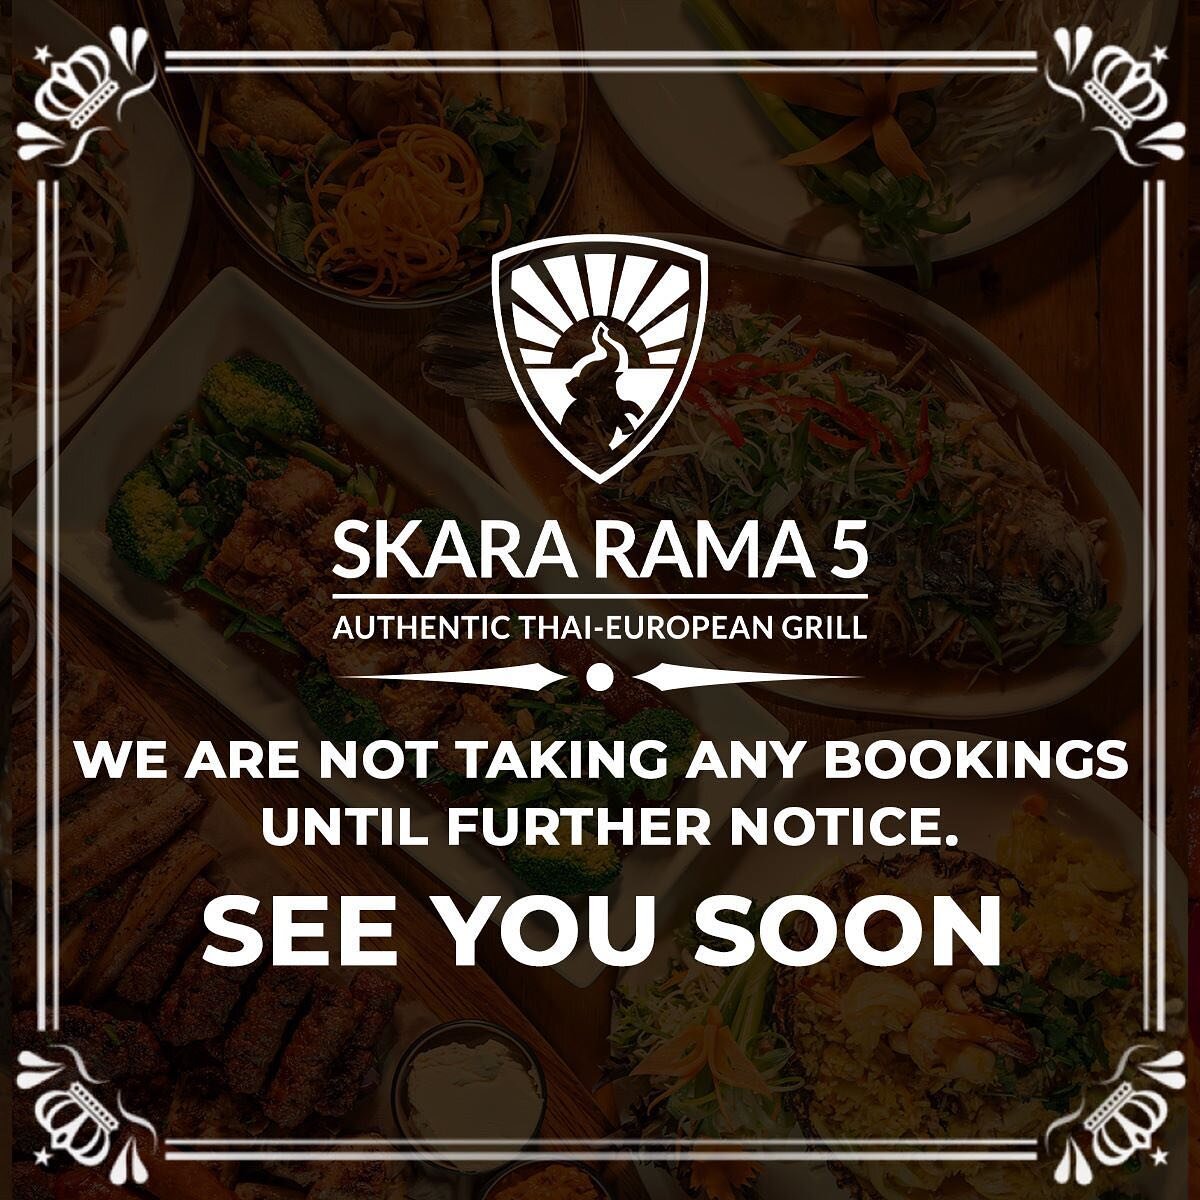 ▫️Just an update - we are not taking any booking until further notice - stay posted with our social media channels for more information! 😊

Call us to book now.

📞 02 9727 7798
📍Shop 4/49 Canley Vale Rd, Canley Vale NSW 2166

#skararama5